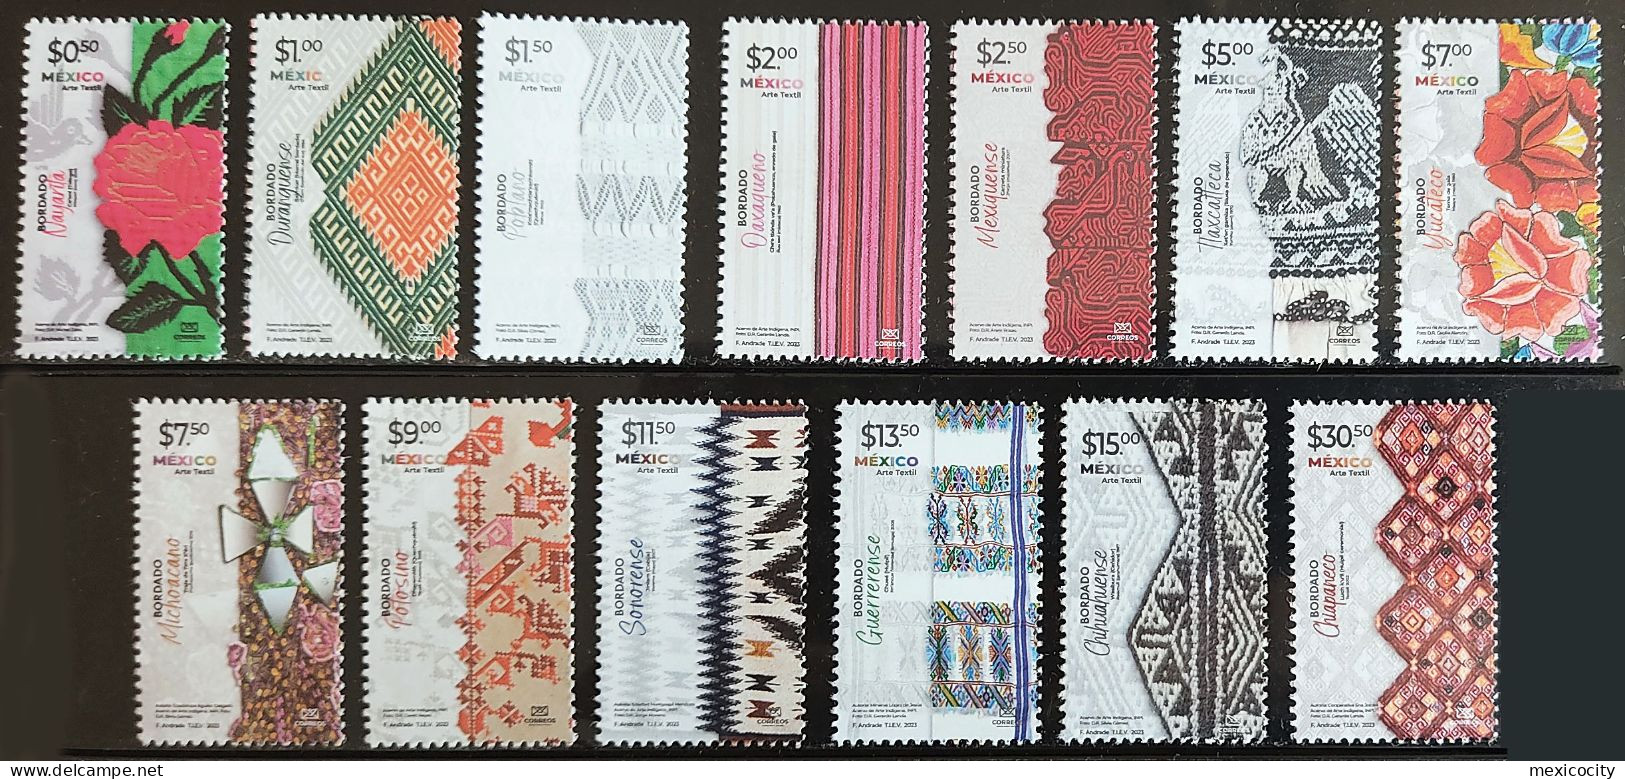 MEXICO 2023 YEAR SET Incl. 2 Defin. Series & 5 Ltd. Bloc Sheets + See 4 Imgs., MNH Unmounted - Mexico